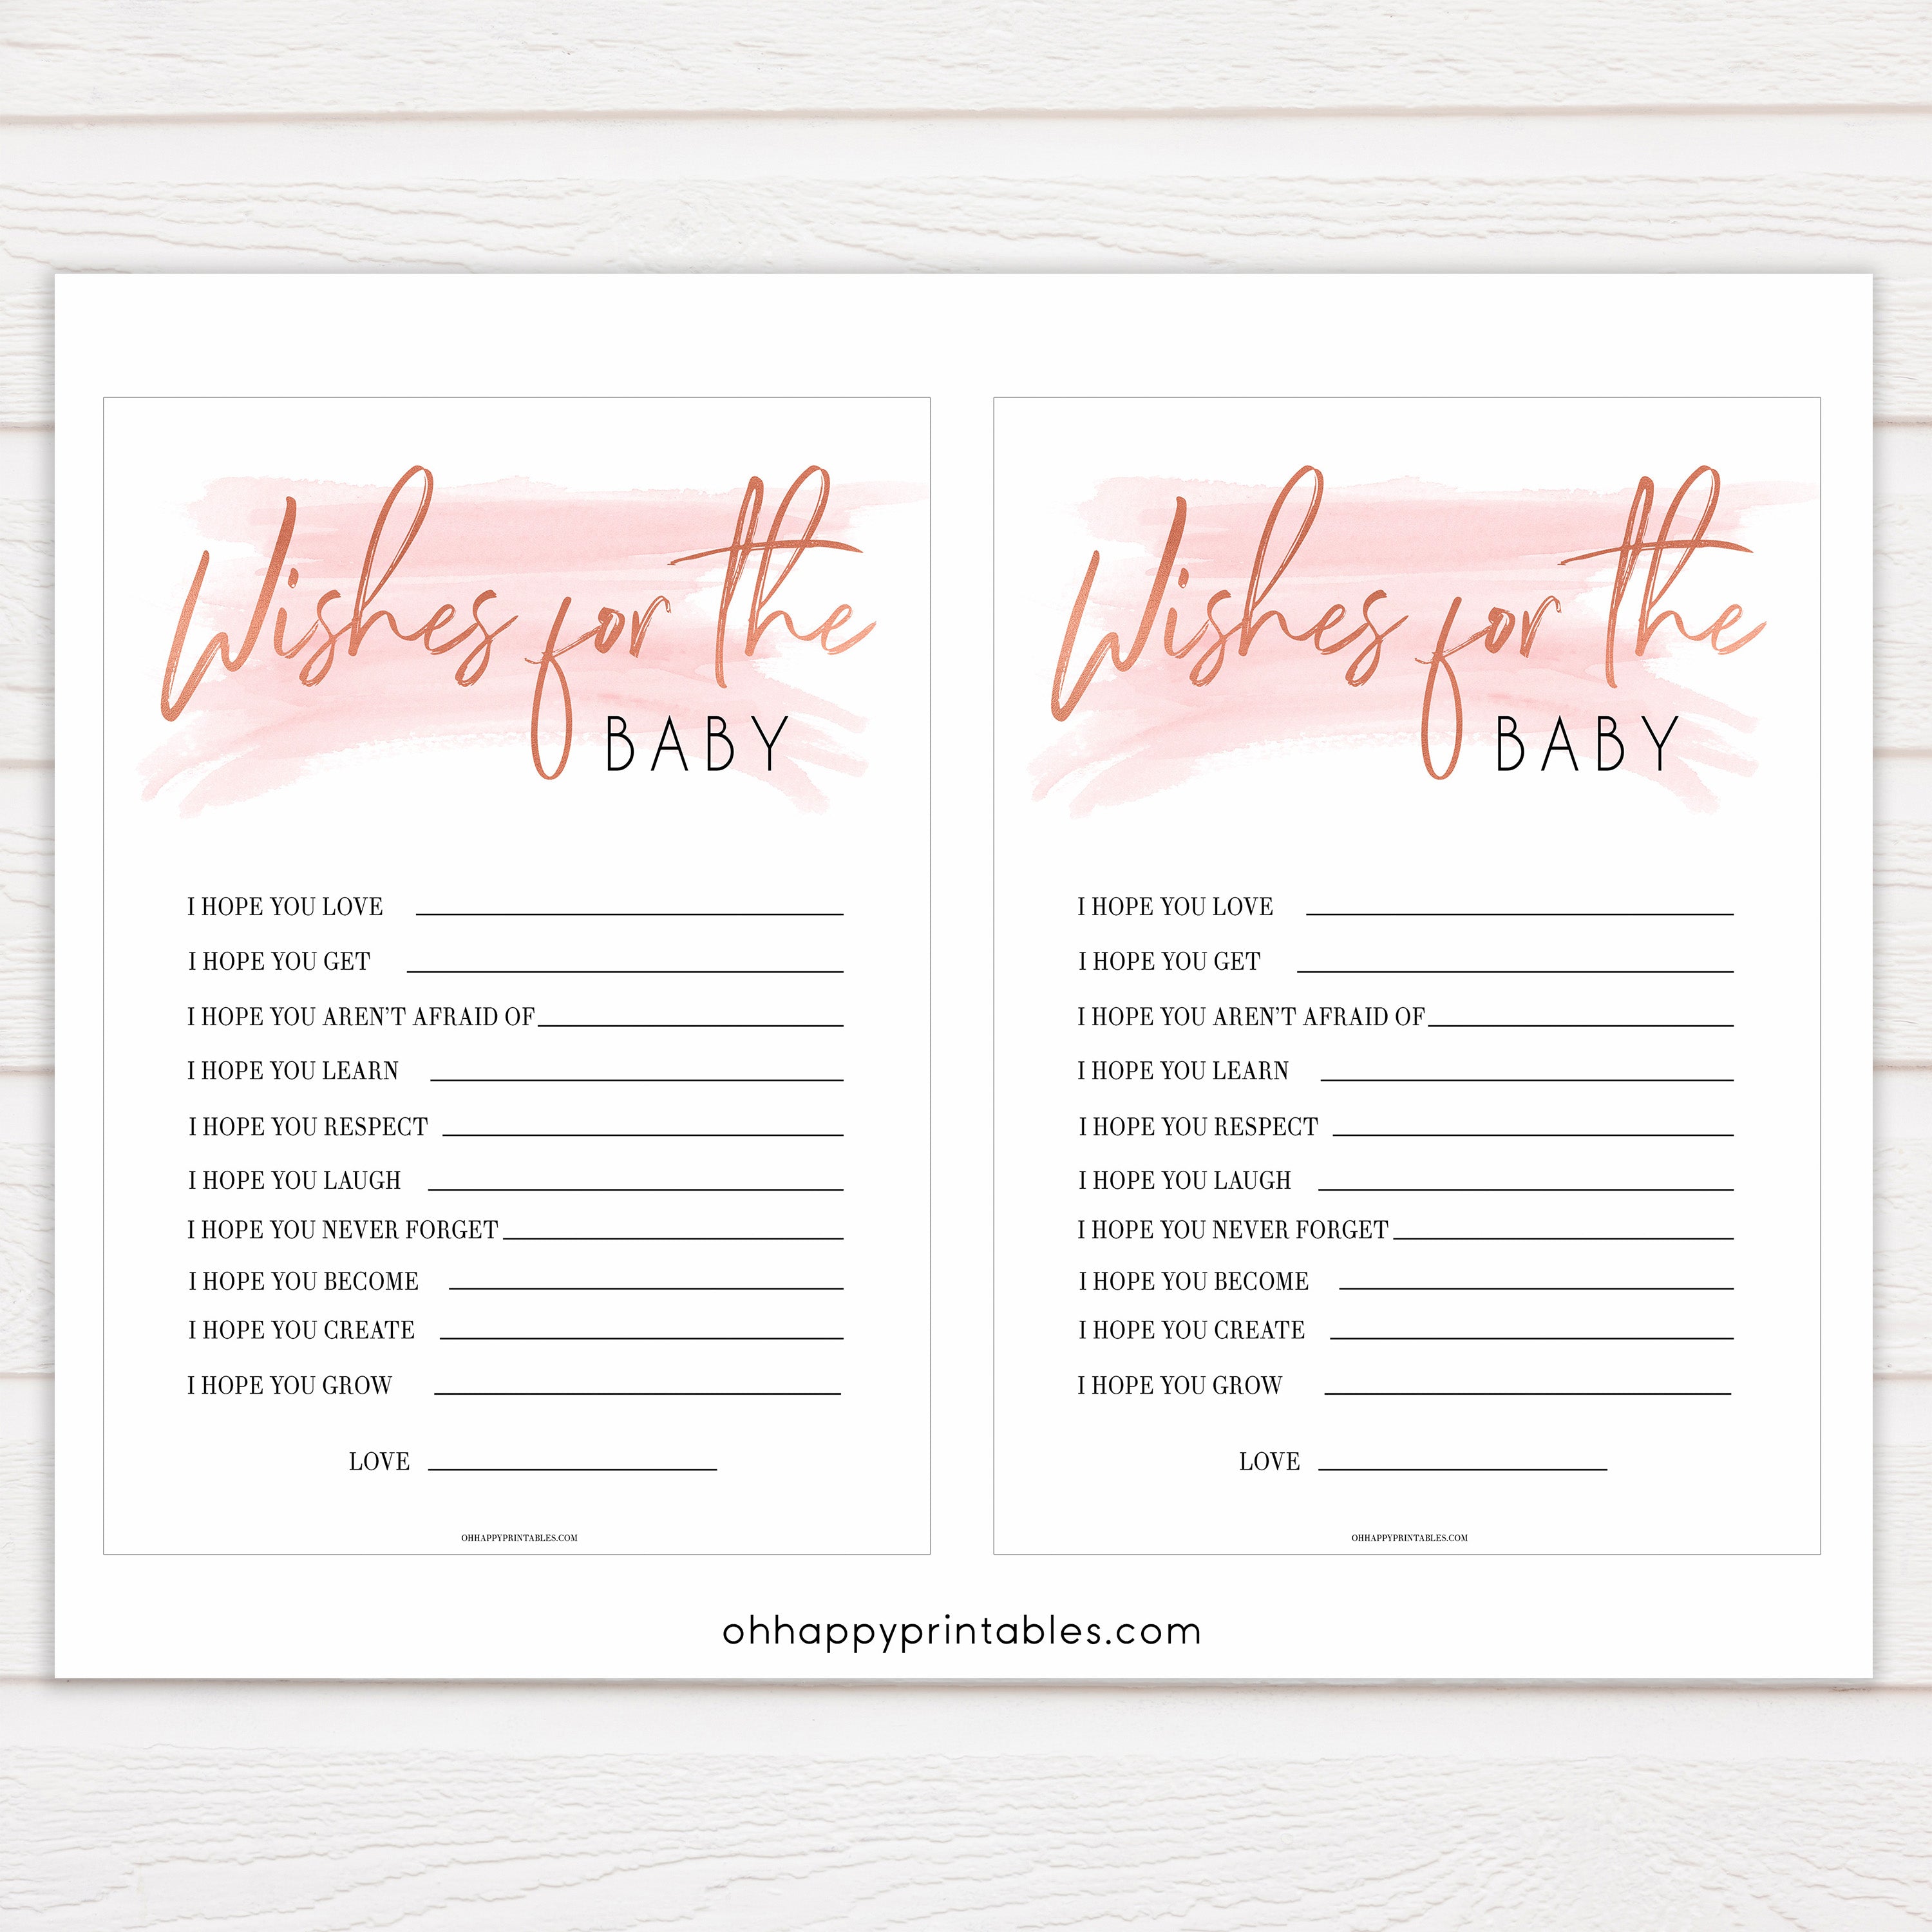 Pink Swash Wishes For The Baby, Baby Wishes, Wishes for The Baby, Printable Baby Shower Games, Baby Shower Baby Wishes, Baby Wishes Card, printable baby shower games, fun baby shower games, popular baby shower games